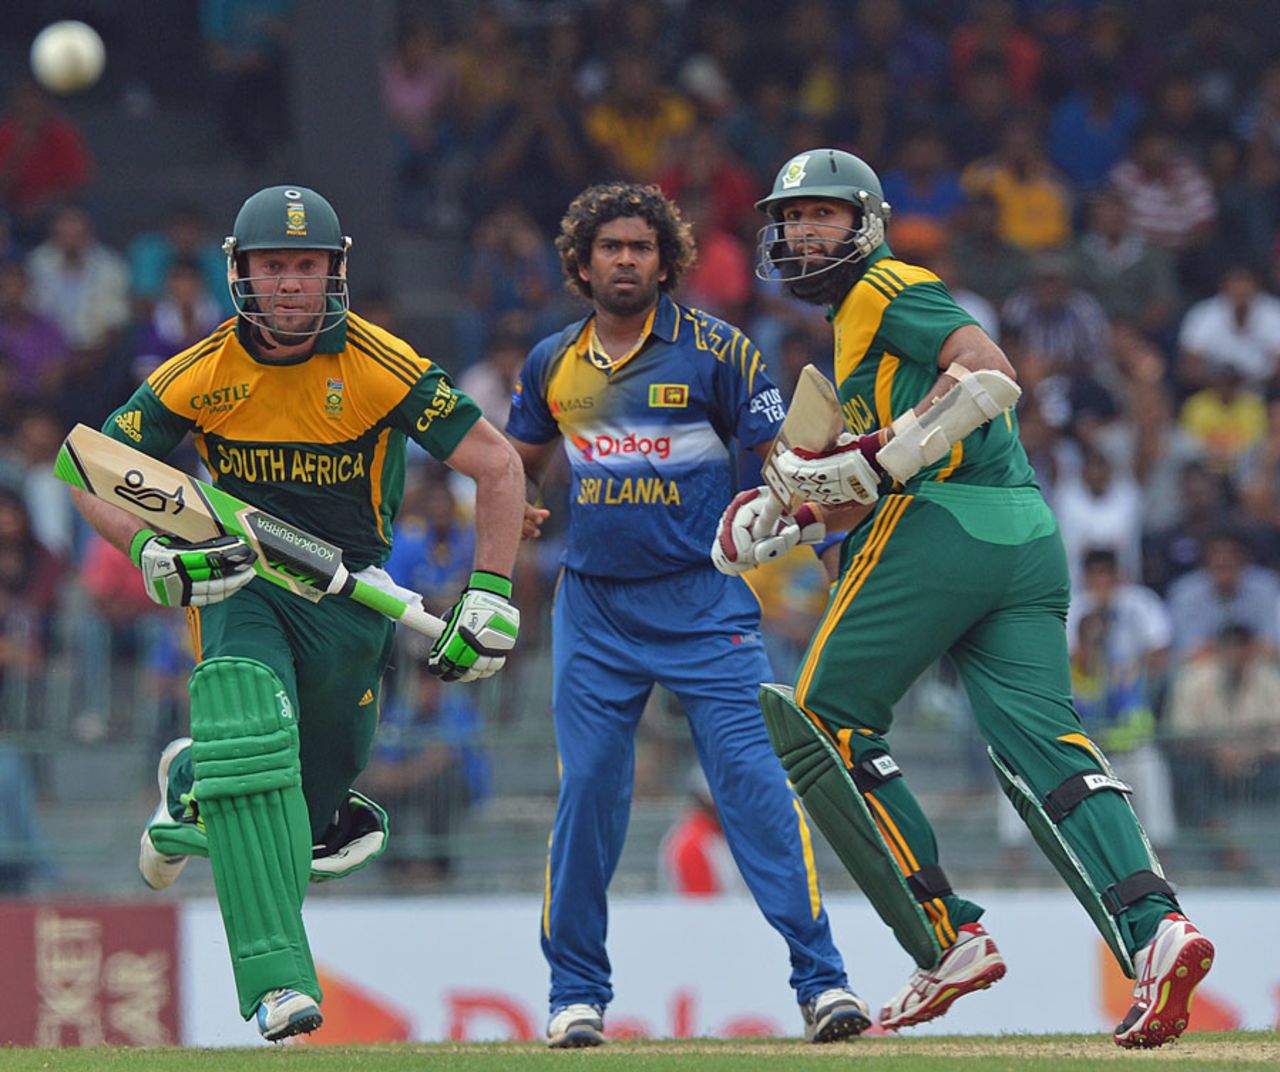 AB de Villiers and Hashim Amla added 151 runs for the third wicket, Sri Lanka v South Africa, 1st ODI, Colombo, July 6, 2014